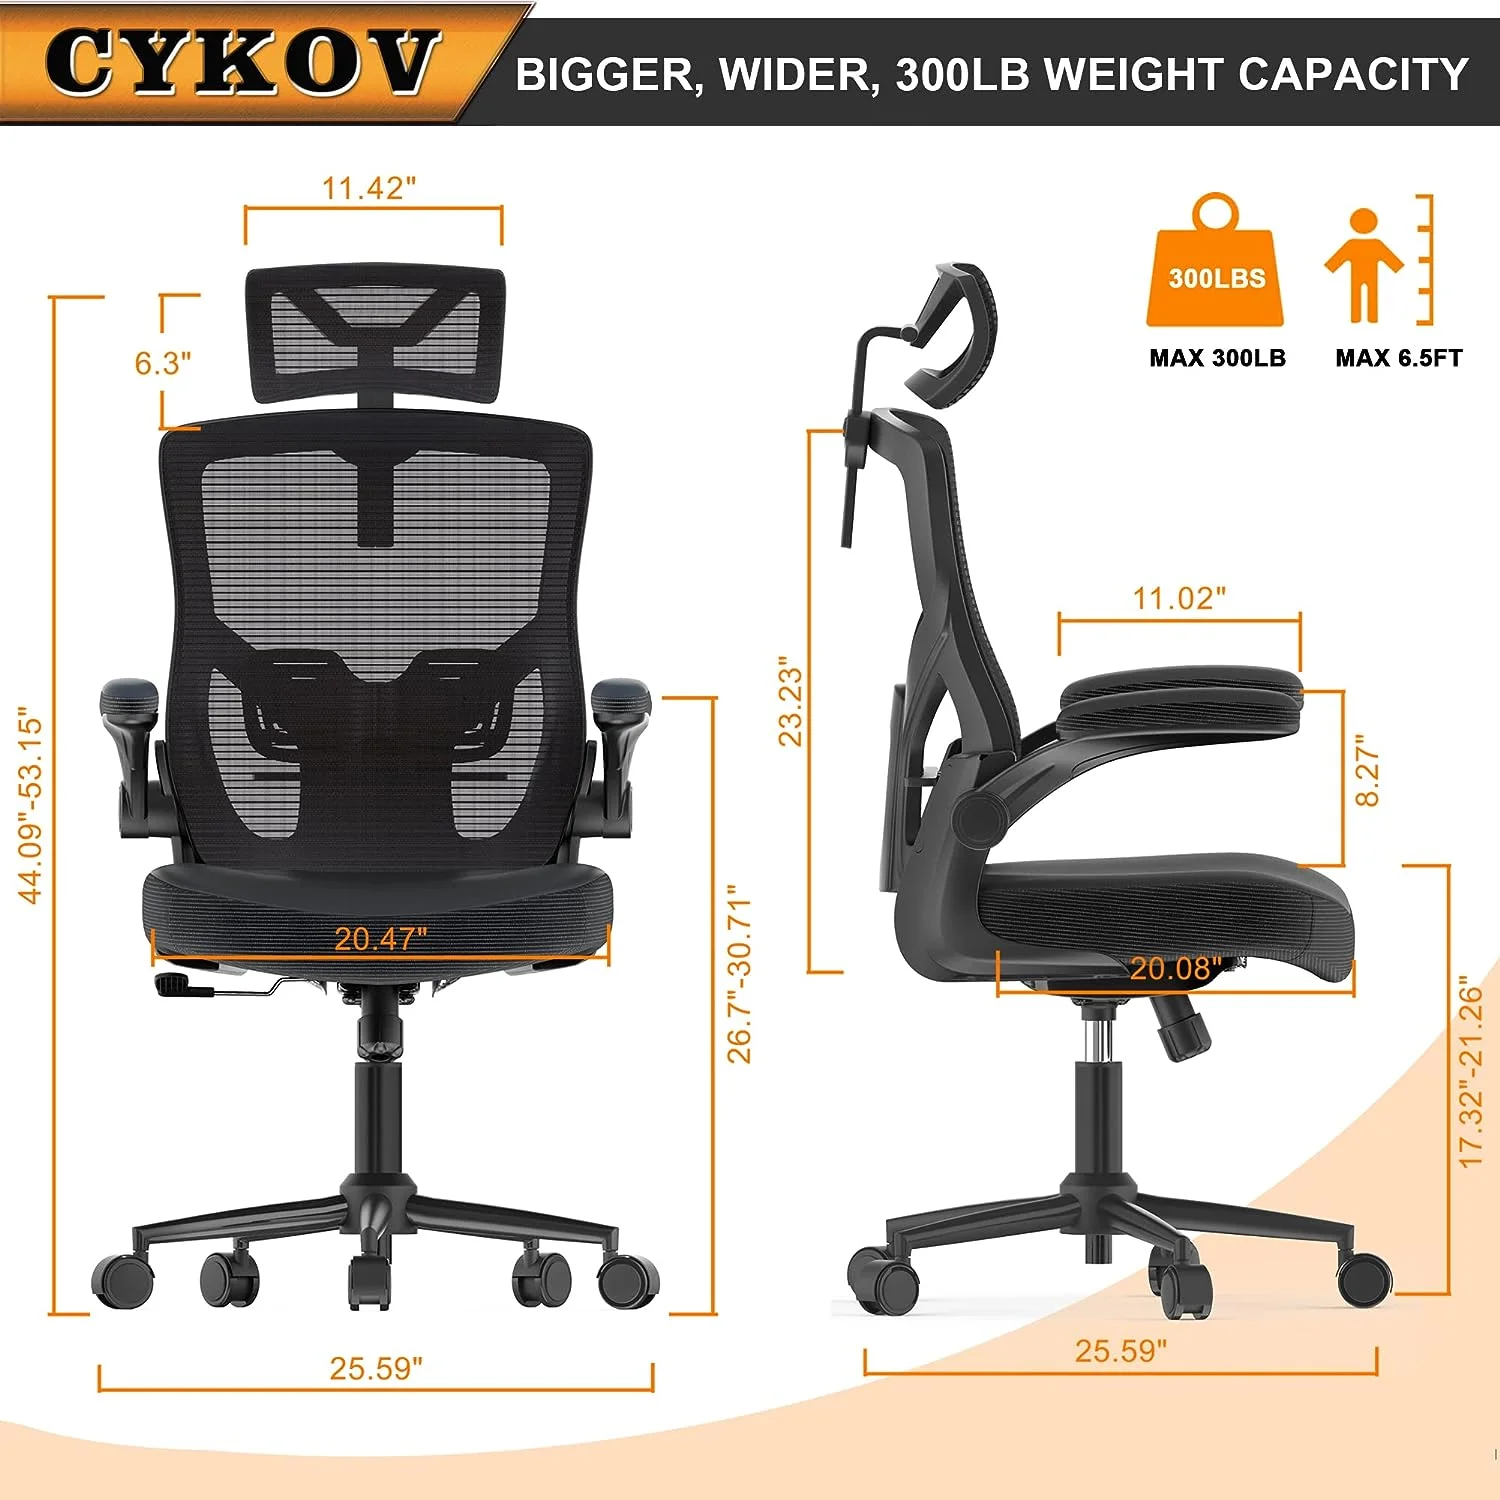 CYKOV Home Office Chair Review - Revolutionizing Your Work!